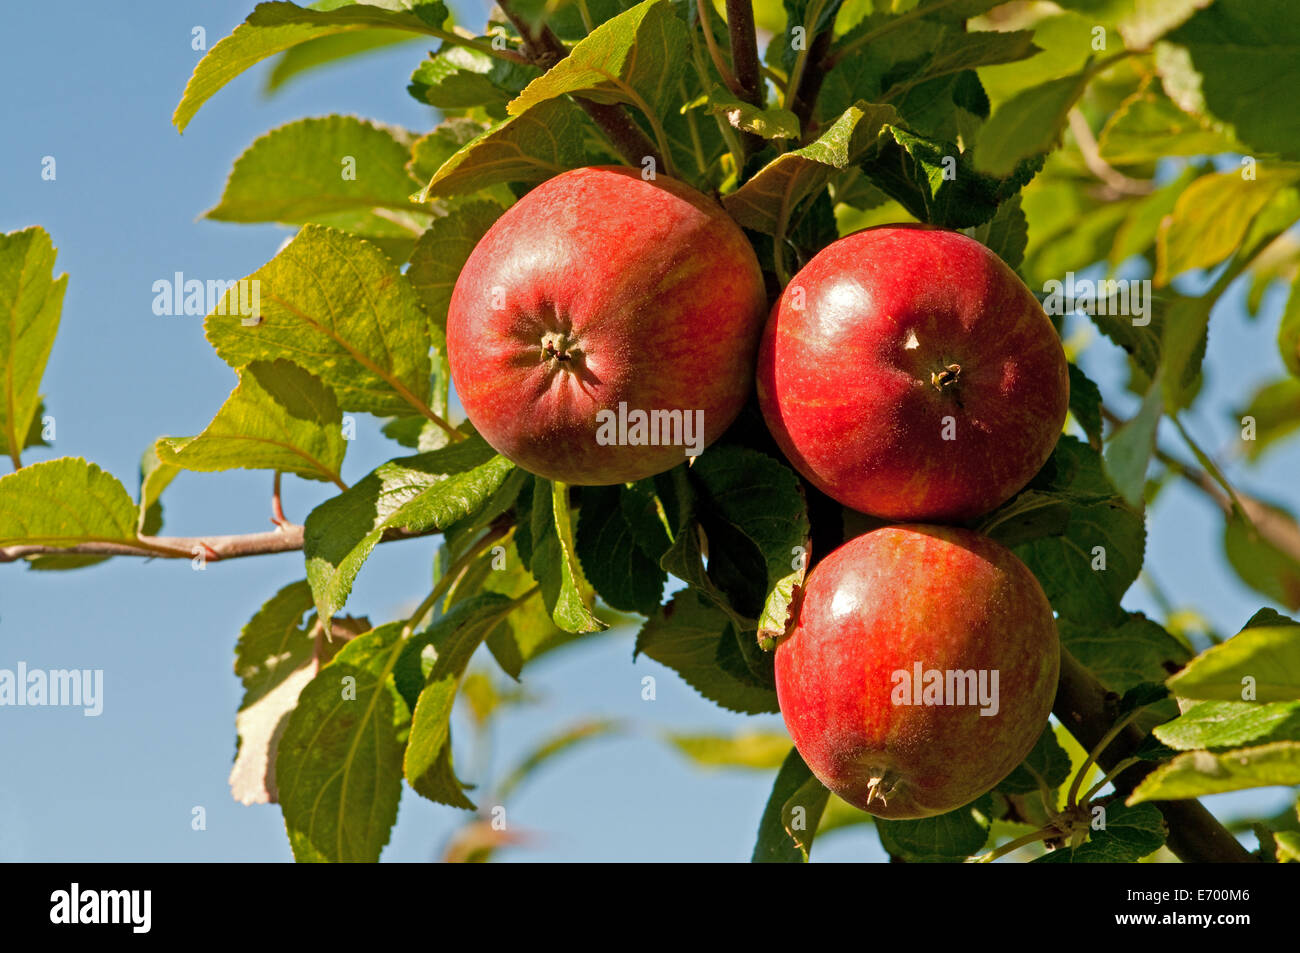 Discovery Apples growing on the tree Stock Photo